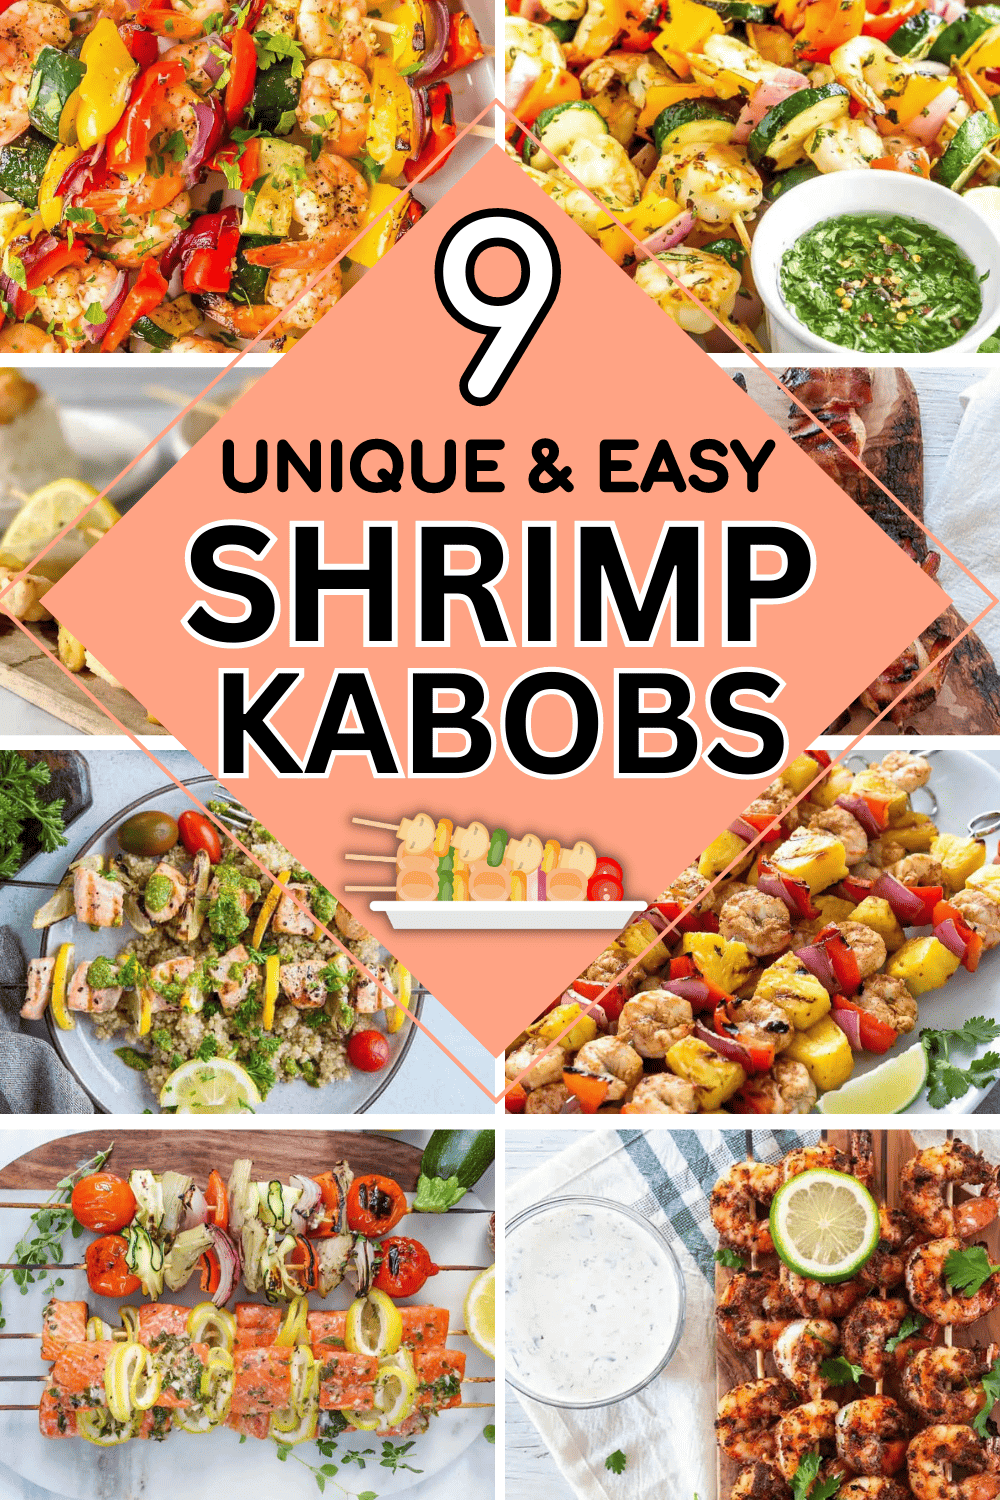 You'll make these easy shrimp kabob recipes on the grill all summer long! Shrimp kebabs on the grill are quick and easy healthy summer dinners. Easy shrimp kabobs on the grill, steak and shrimp kabobs on the grill skewers, grilled shrimp kabob recipes, marinade for shrimp kabobs, how to grill shish kabobs, marinated shrimp steak skewers recipes, shrimp shish kabobs marinade recipes, chicken and shrimp kabobs on the grill, easy teriyaki shrimp kabobs on the grill marinade recipes, shrimp skewers.